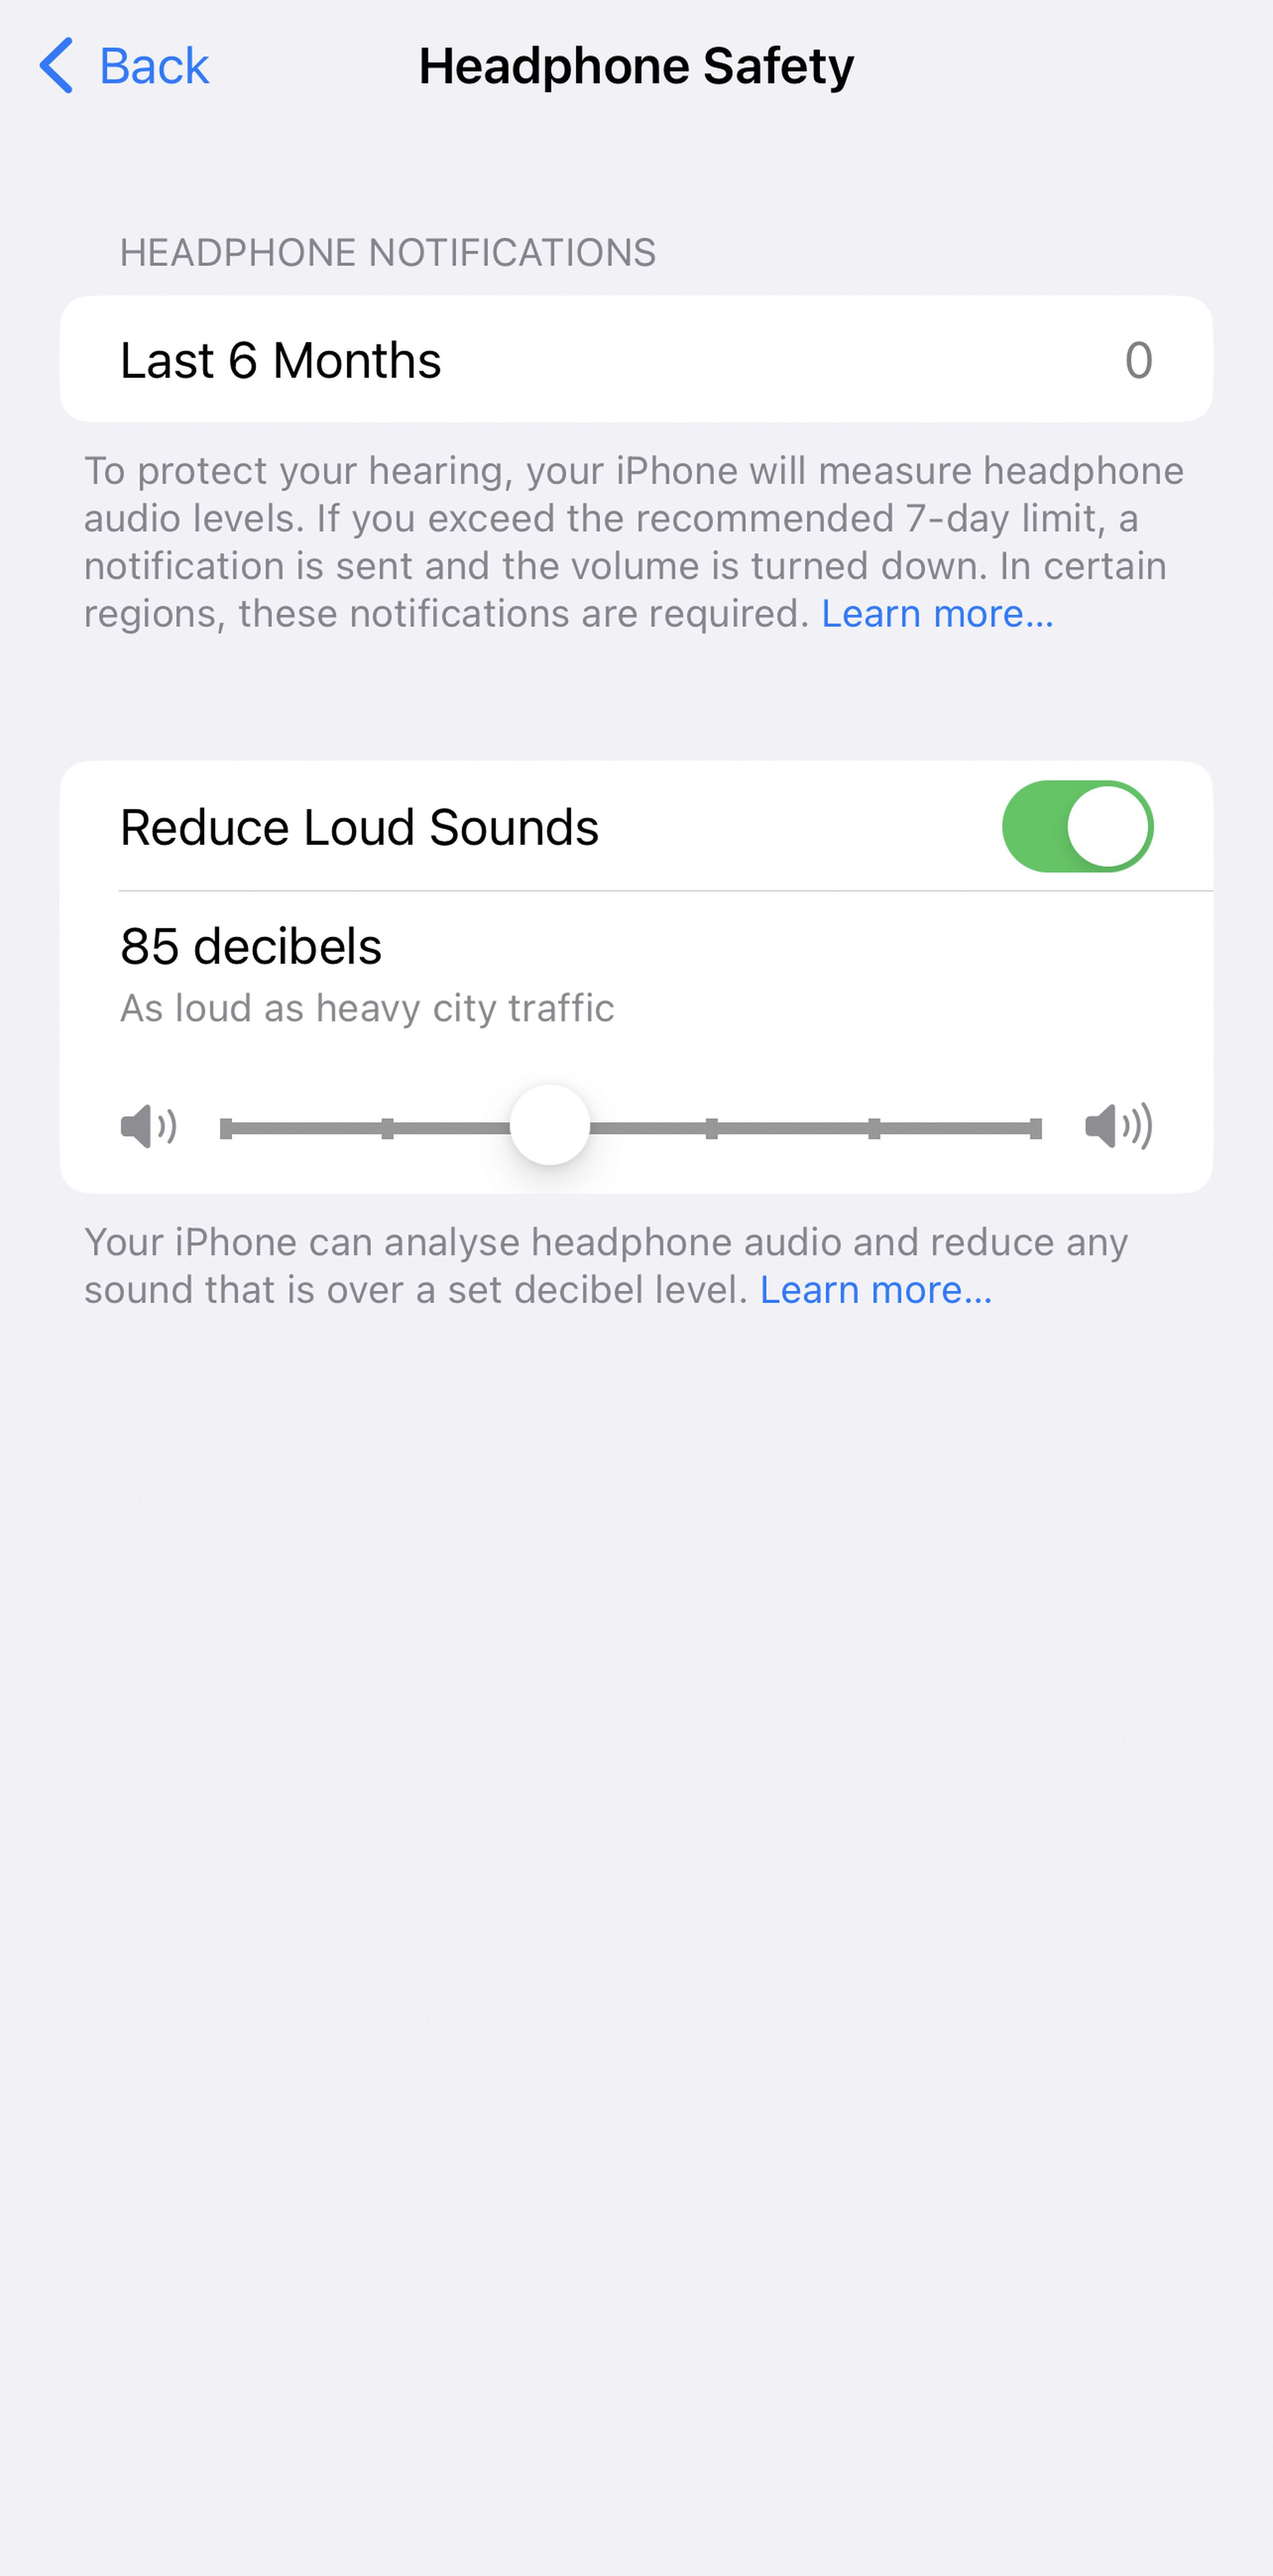 Headphone safety on top of screenshot, then headphone notification last 6 months reads 0, and under that reduce loud sounds is toggled on.